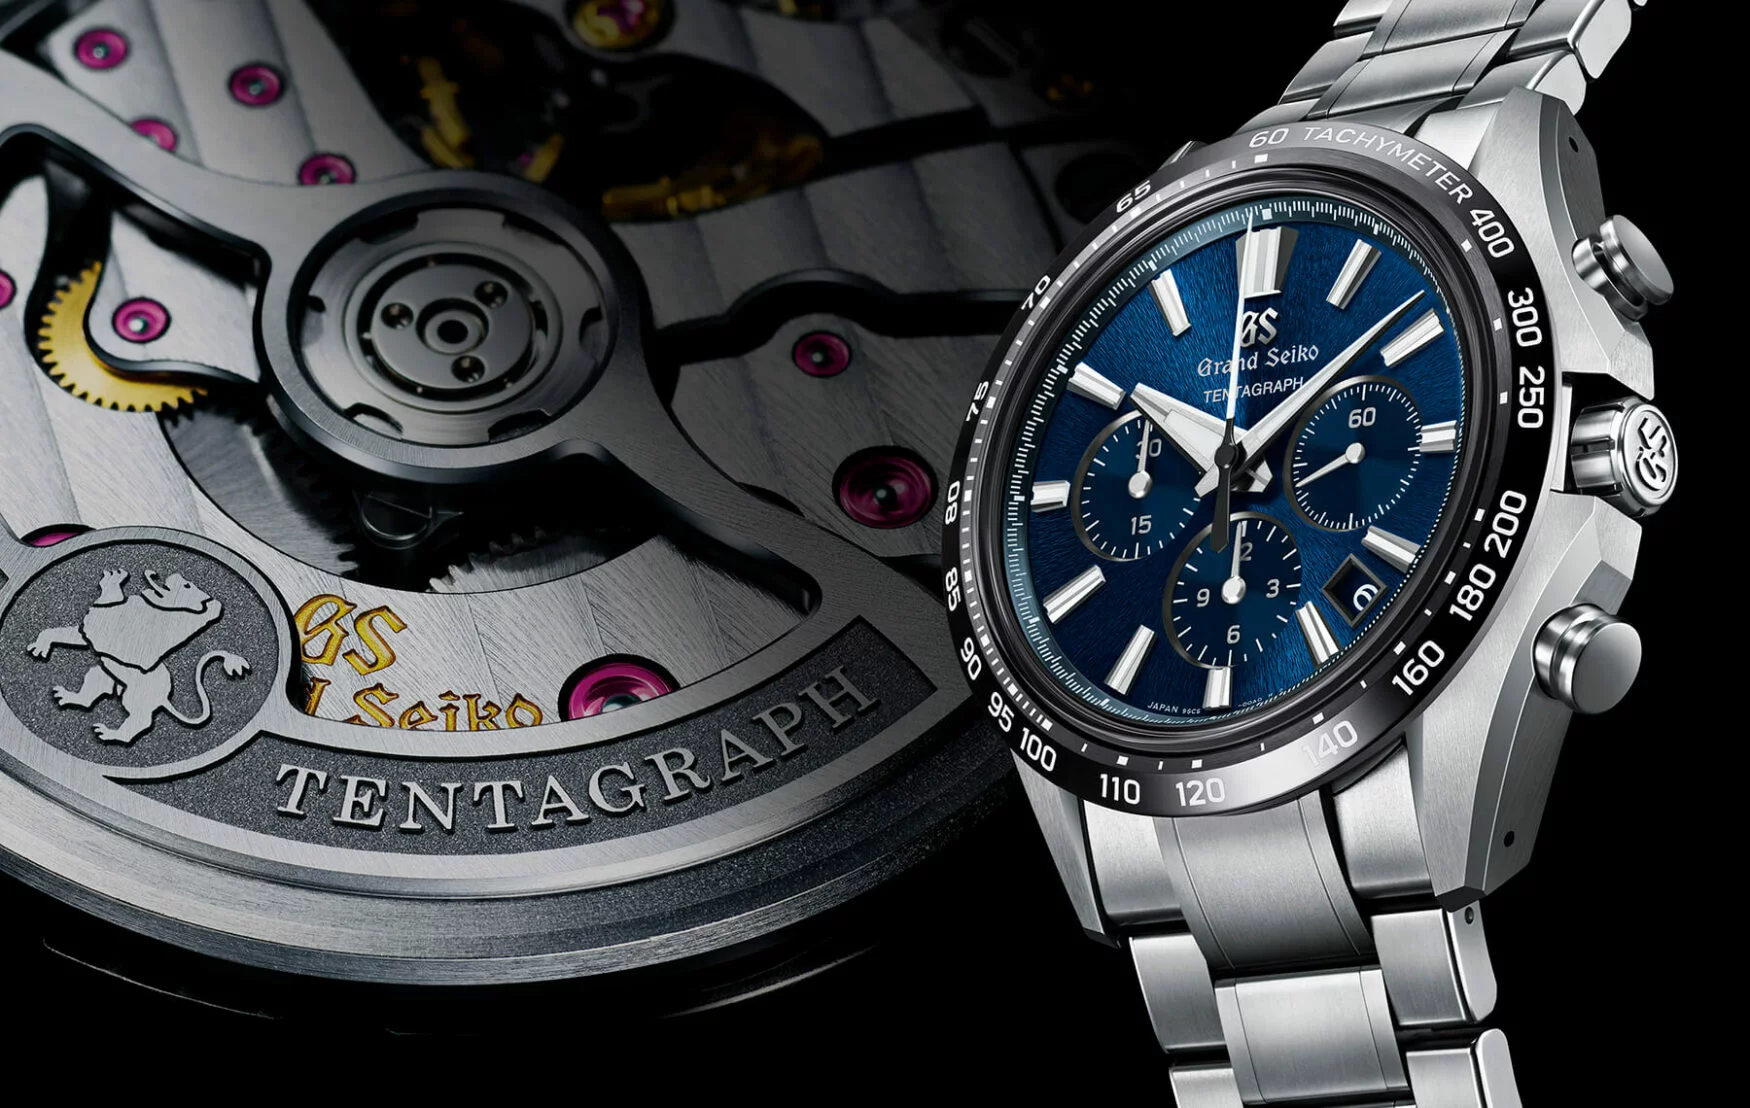 VERSUS: The Grand Seiko SBGH289 and Omega Planet Ocean